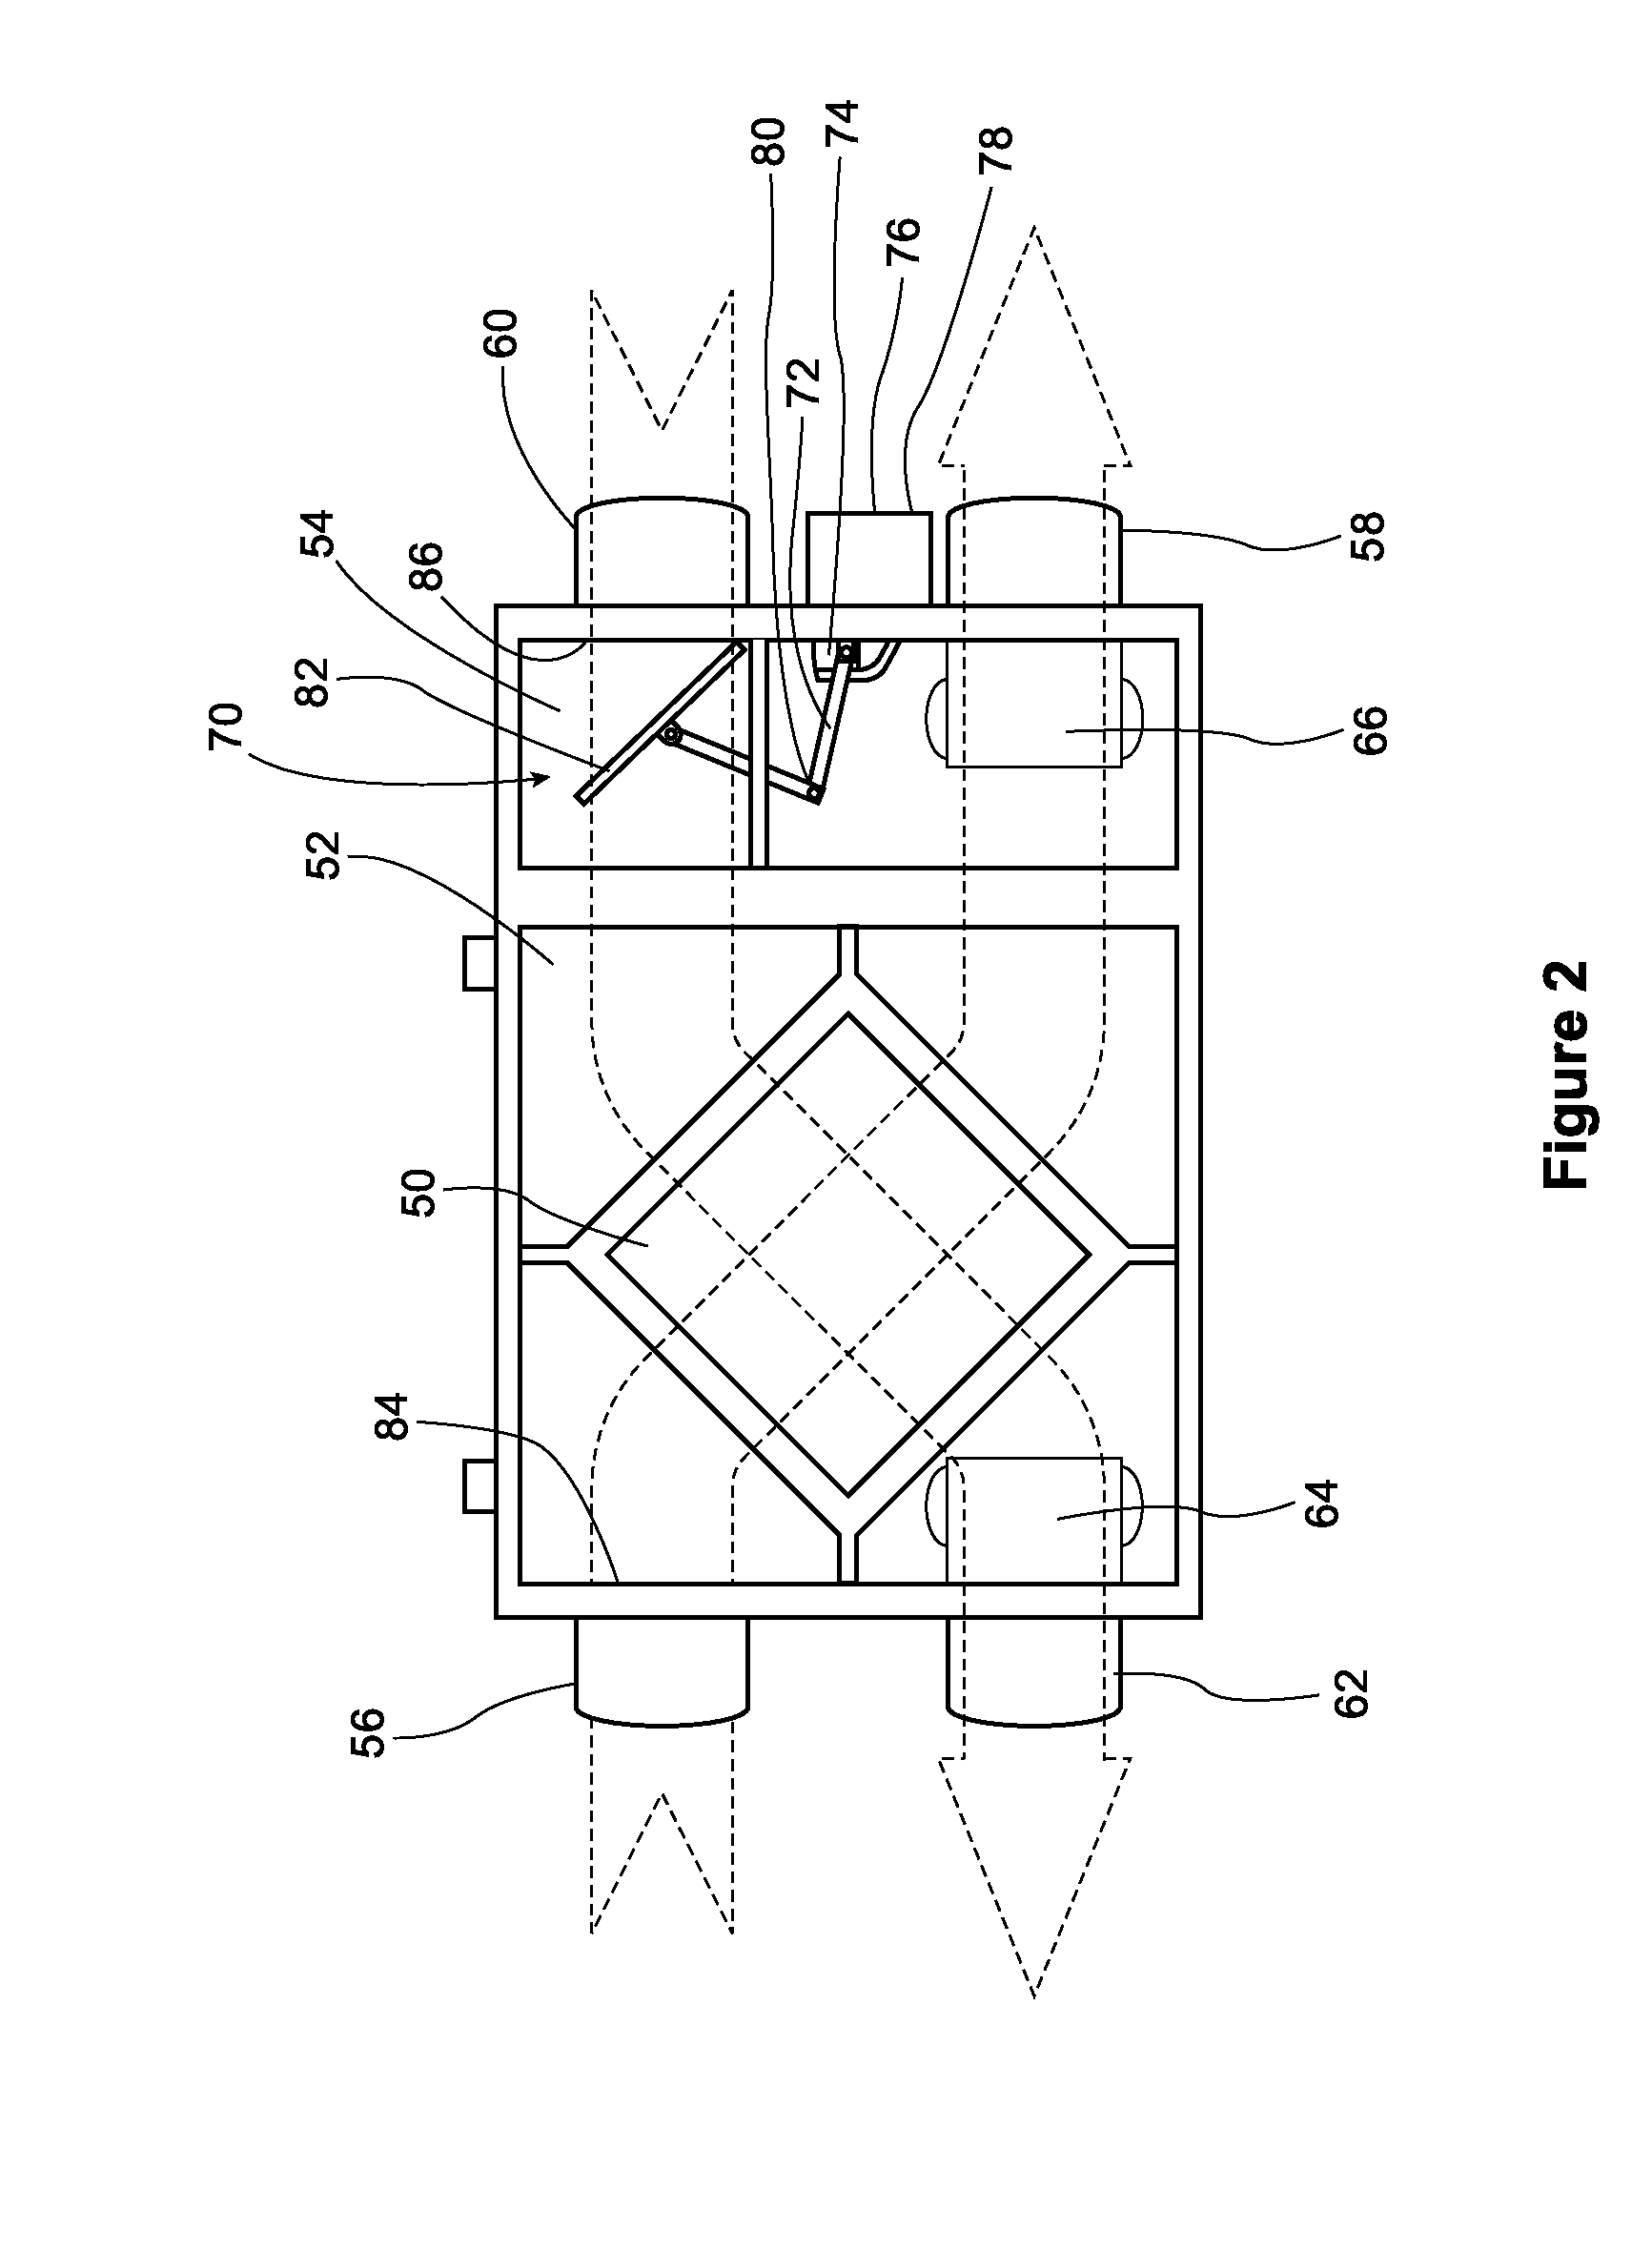 Hrv/erv with improved air flow balancing and method of operating the same